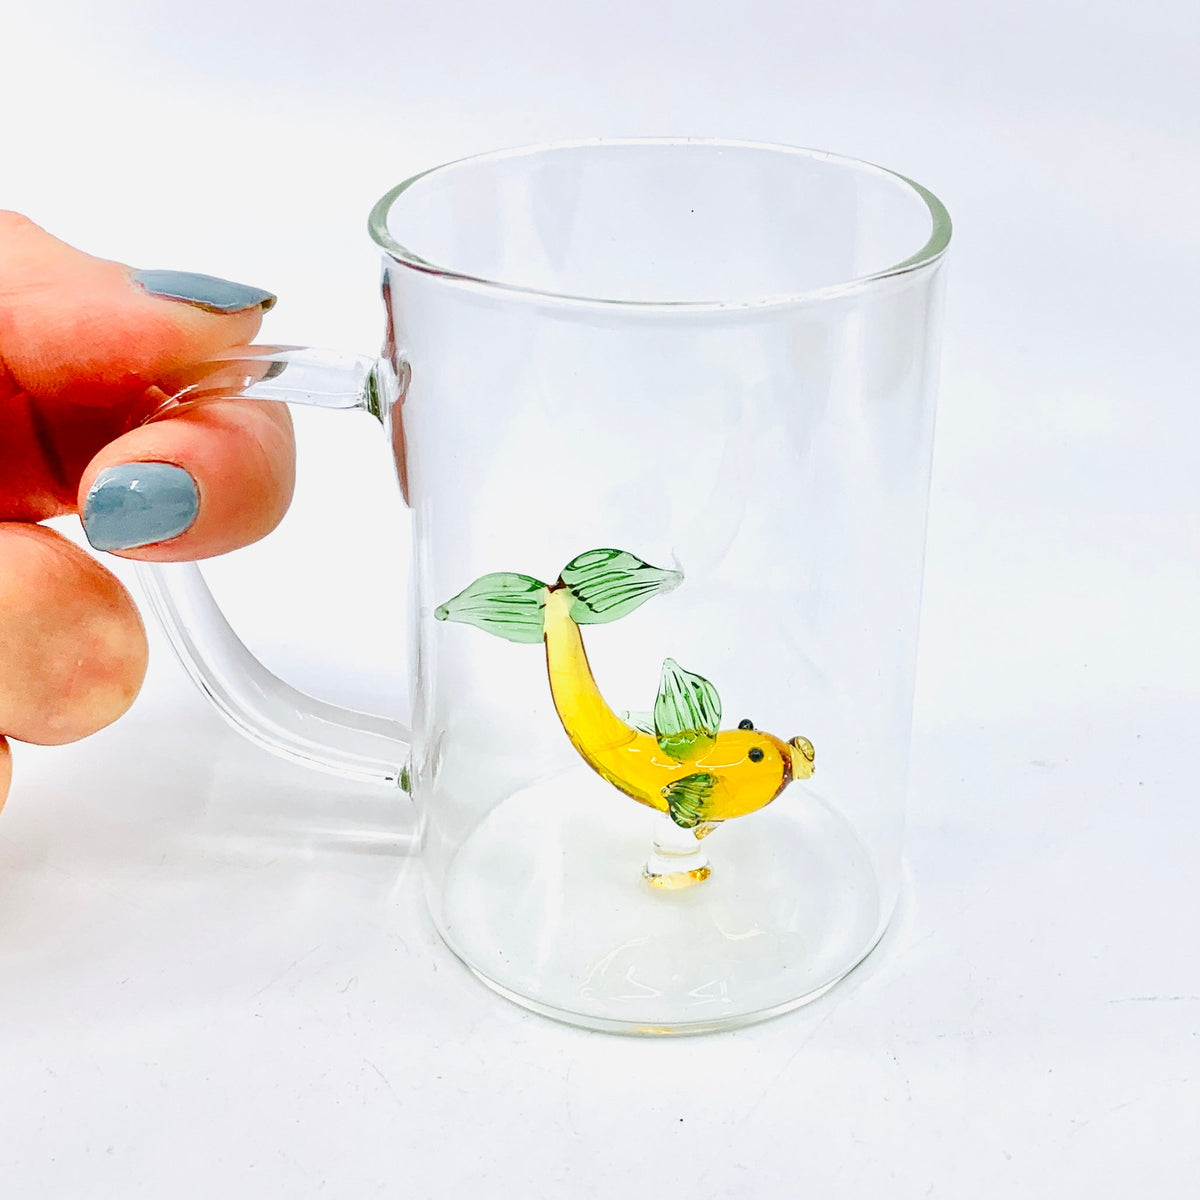 Glass Mug With Wild Animal Figures, Drink Glasses, Water Cup